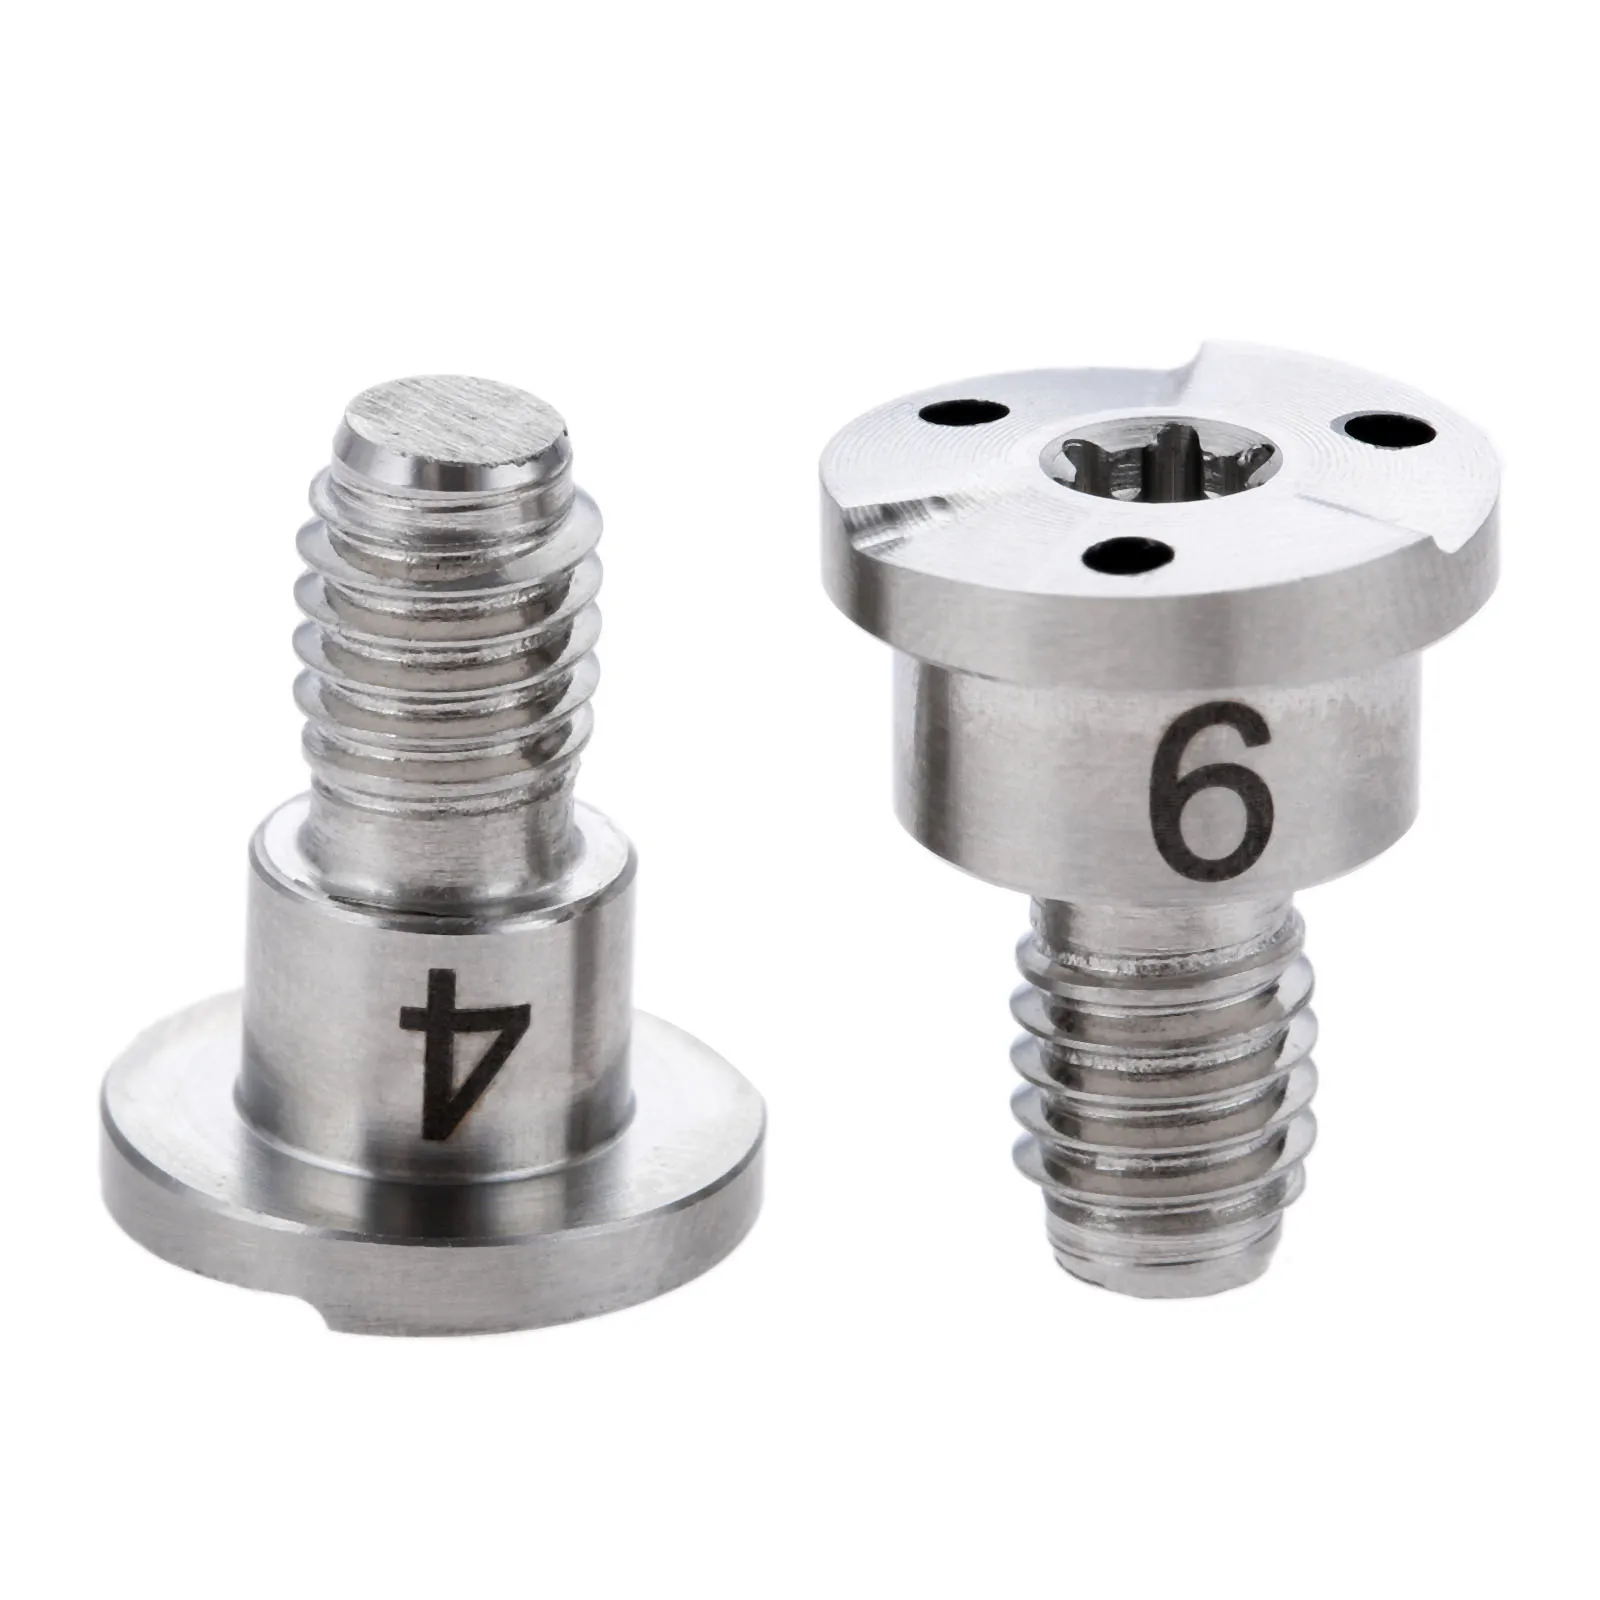 

1pc Golf Weight Screw Replacement Fit for Callaway EPIC Flash Sub Zero GBB Driver Fairway Wood 2/4/6/8/10/12/14/15g